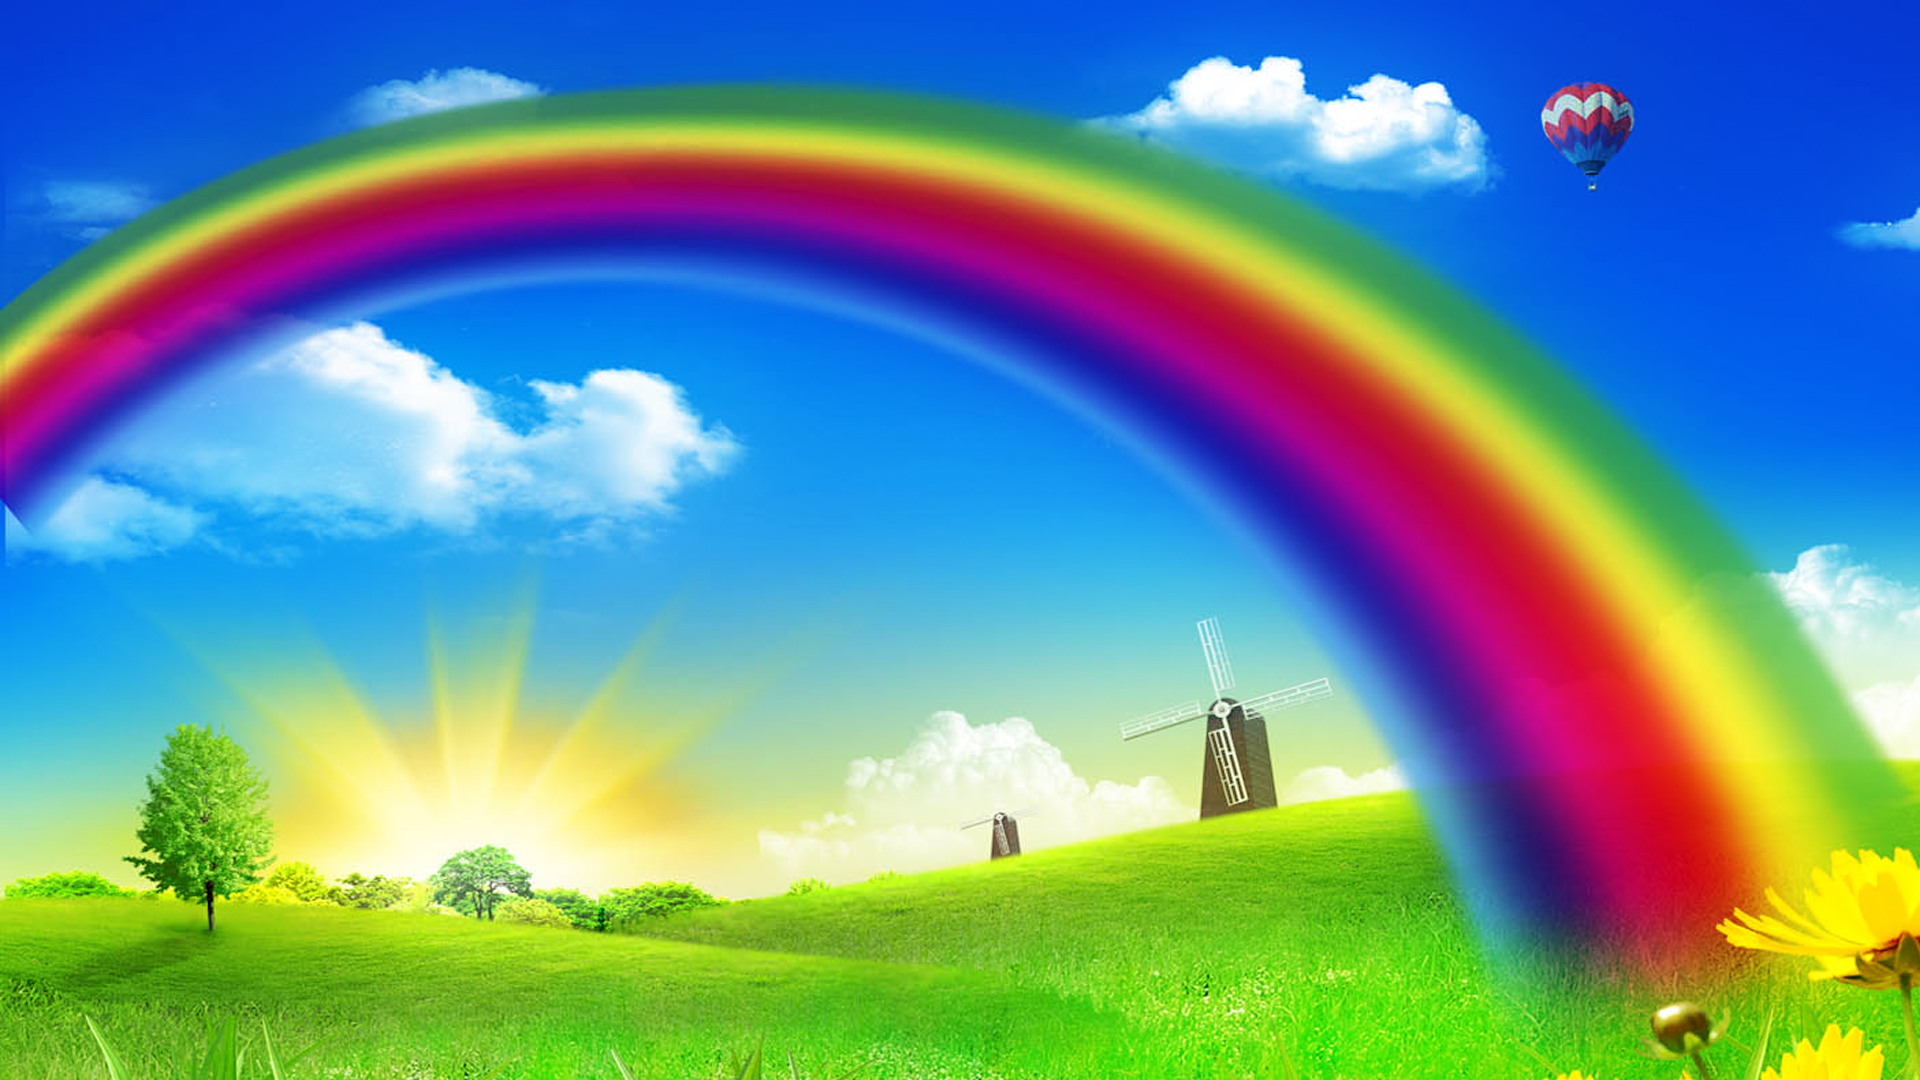 Free download Rainbow Backgrounds 